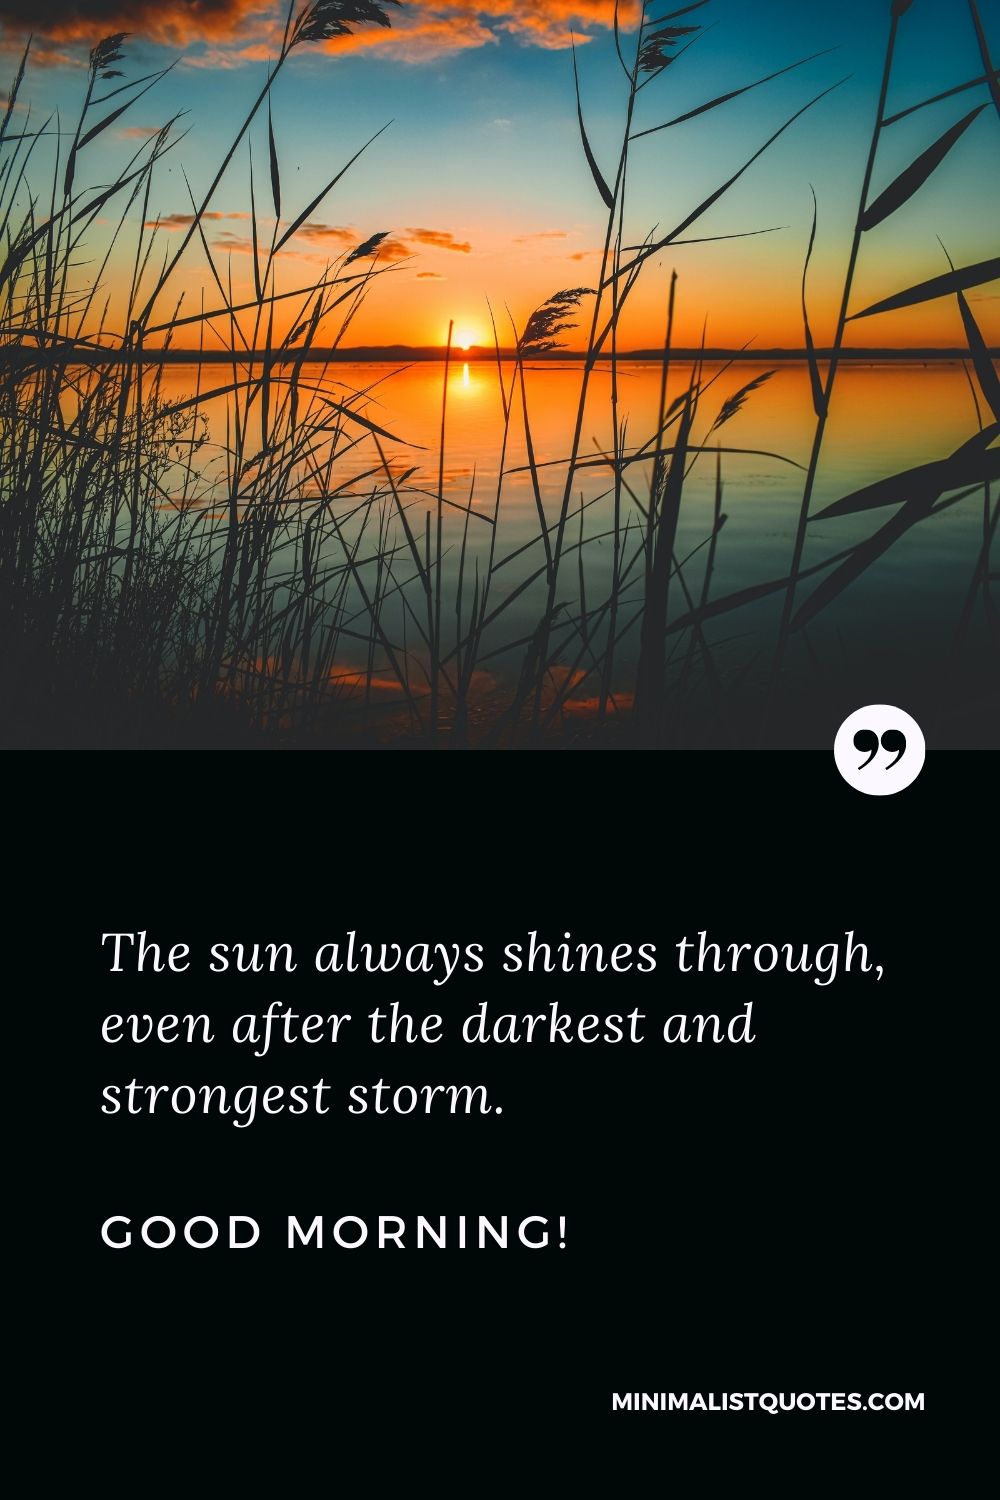 Morning Quote, Wish & Message With Image: The sun always shines through, even after the darkest and strongest storm. Good Morning!